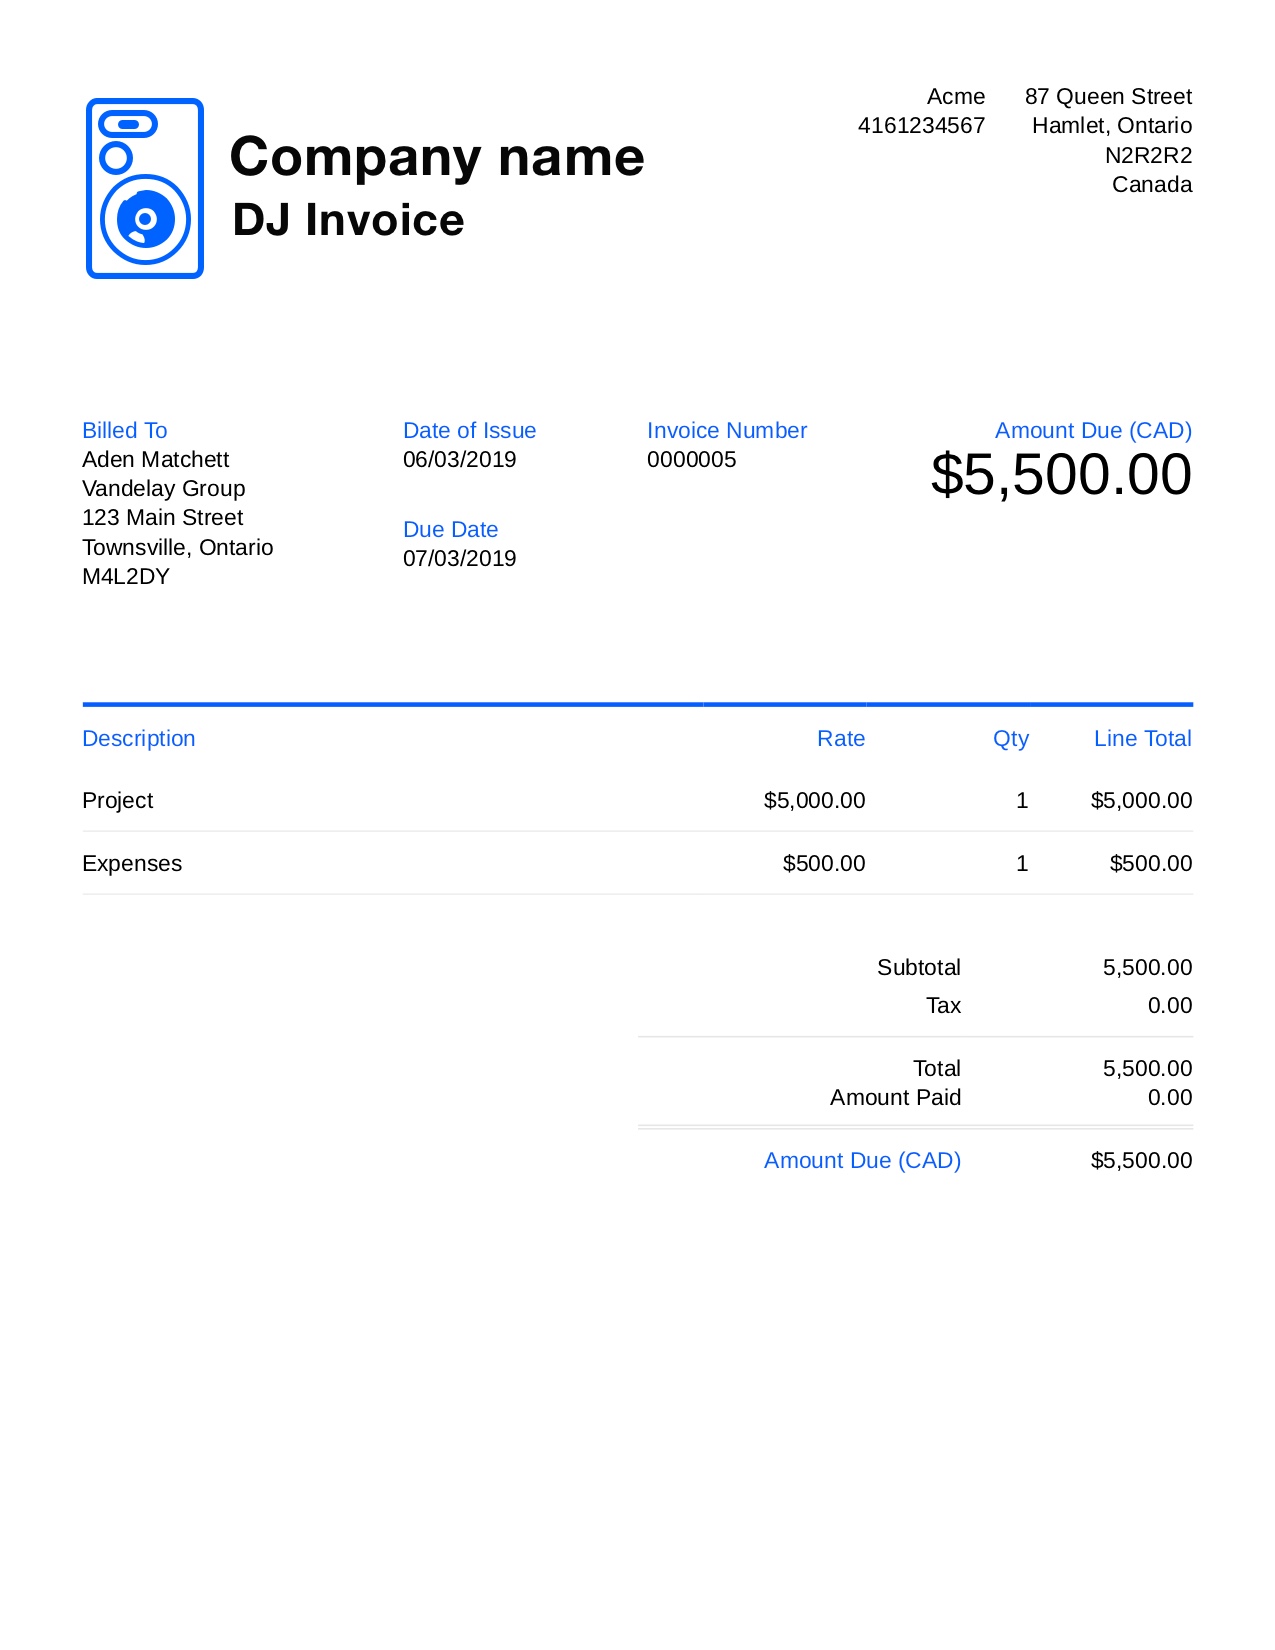 Free Dj Invoice Template. Customize and Send in 20 Seconds Intended For Invoice Template For Dj Services